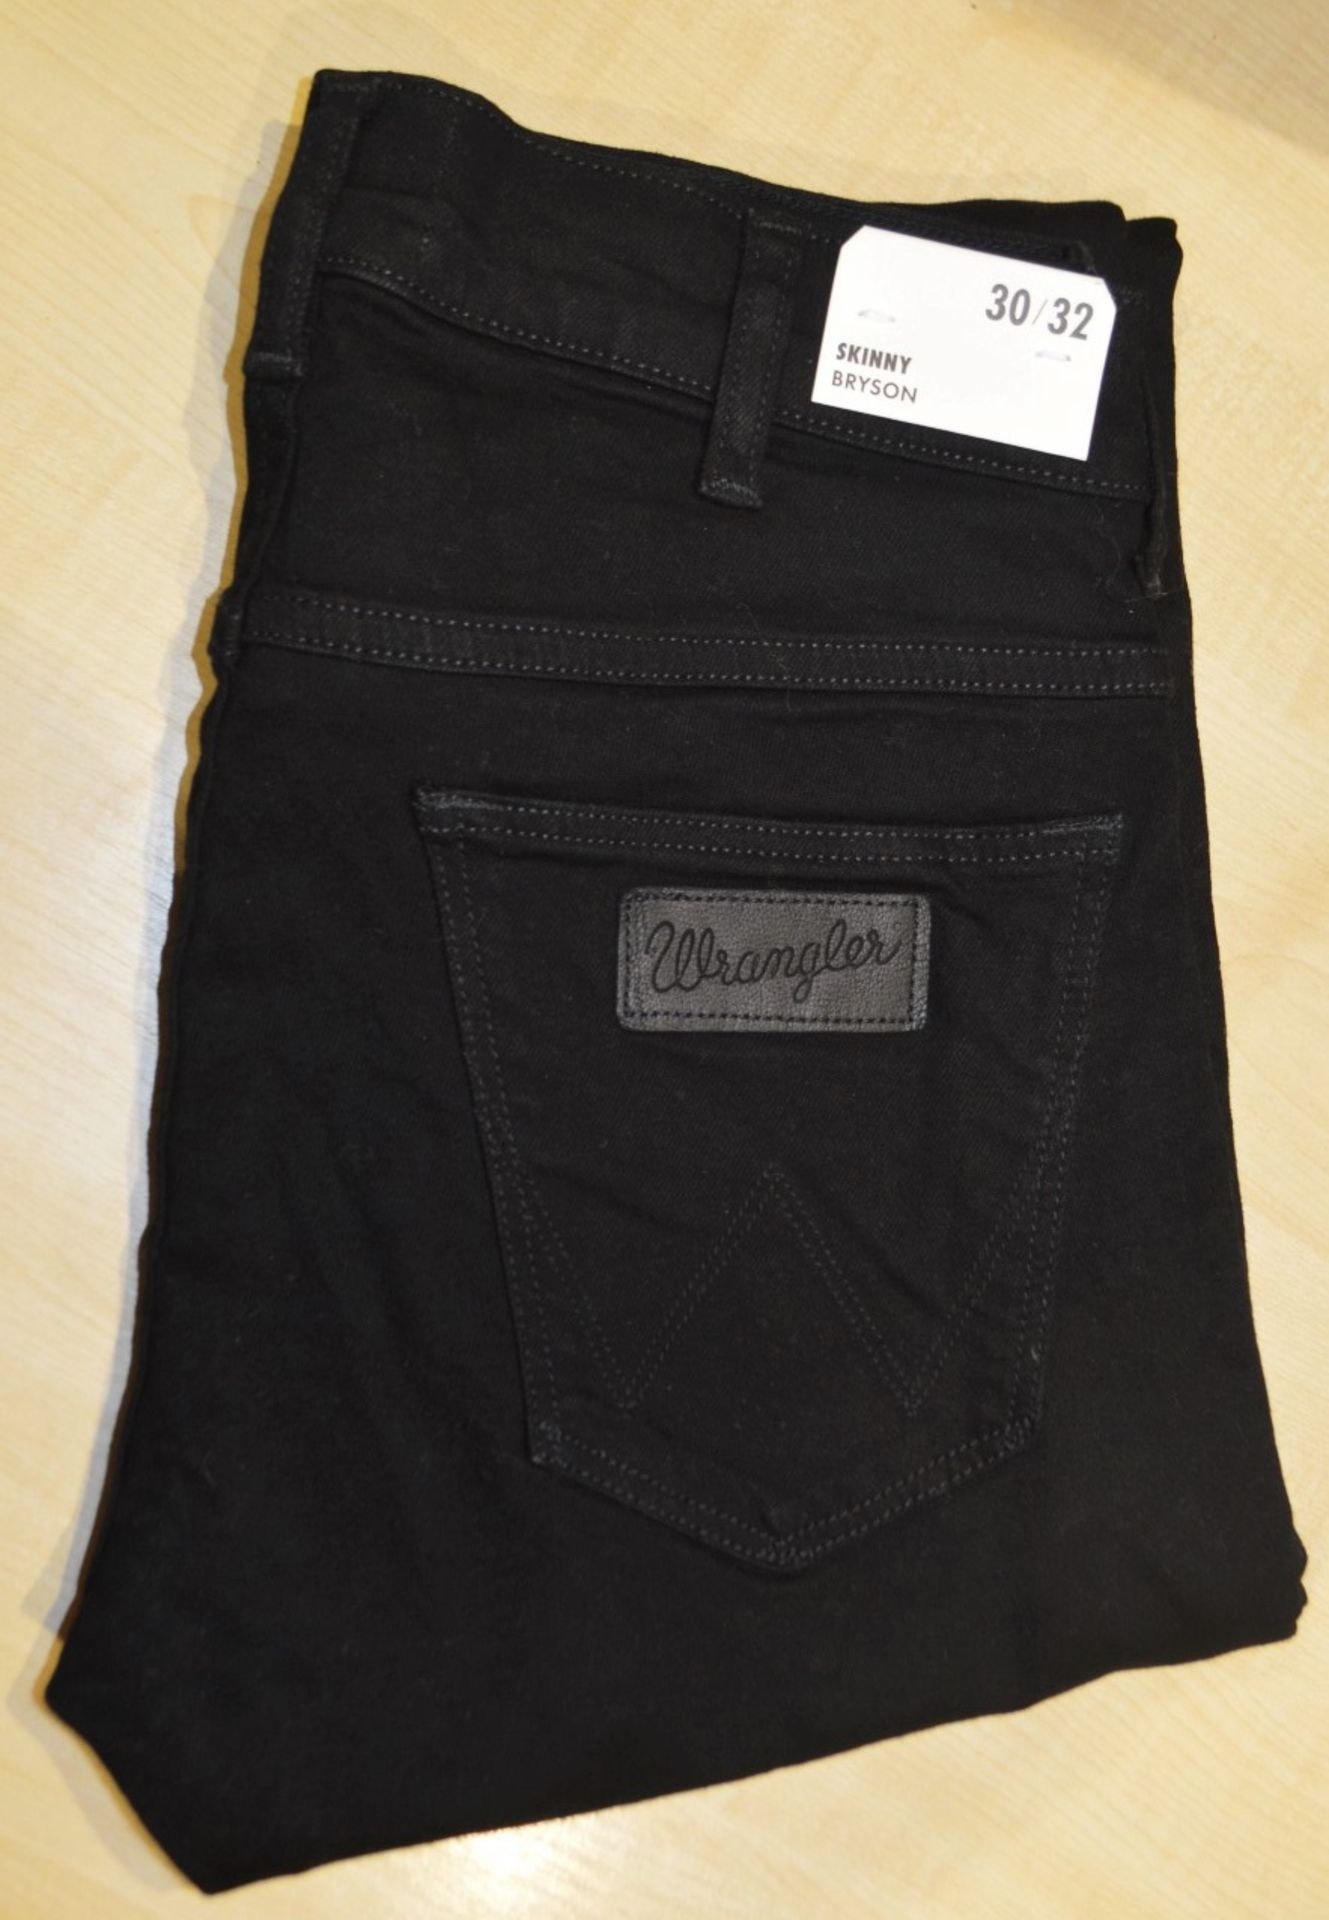 1 x Pair Of Men's Genuine Wrangler Jeans In Black - Size: 30/32 - Preowned, Like New With Tags - - Image 5 of 10